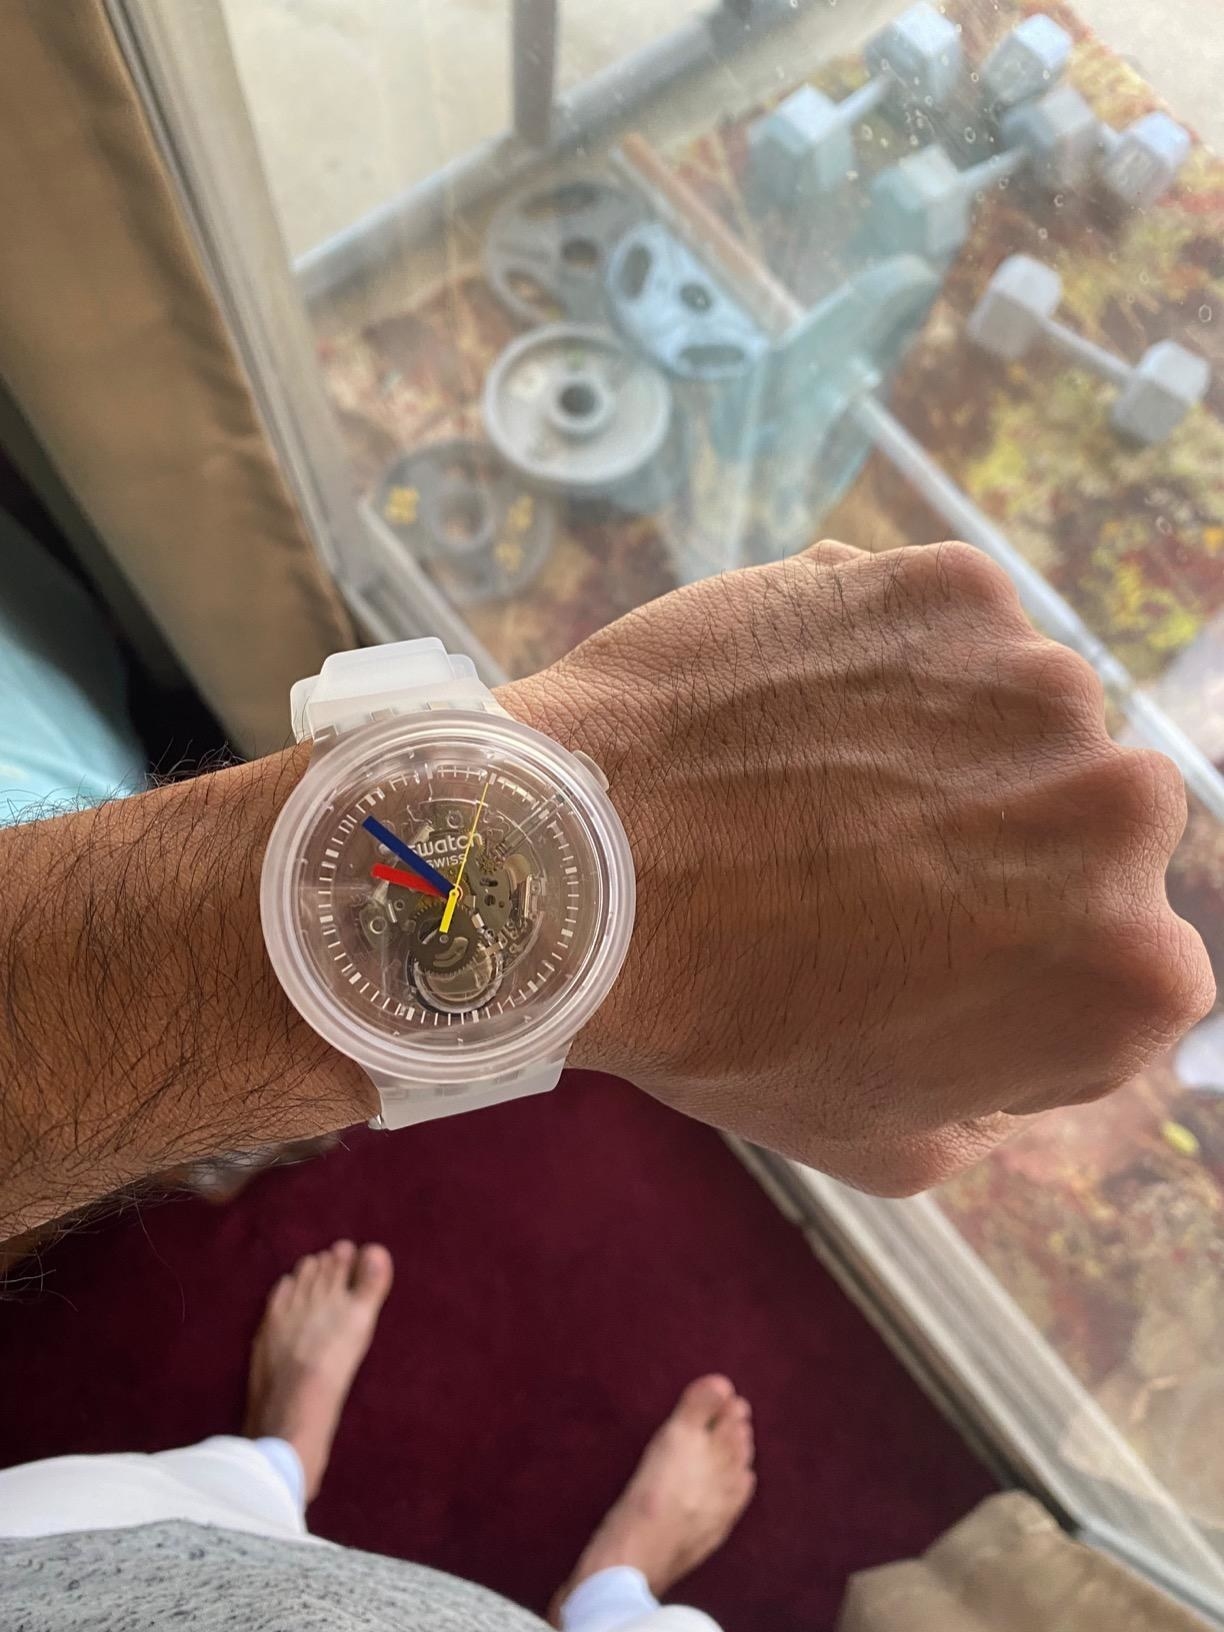 The clear watch on a wrist